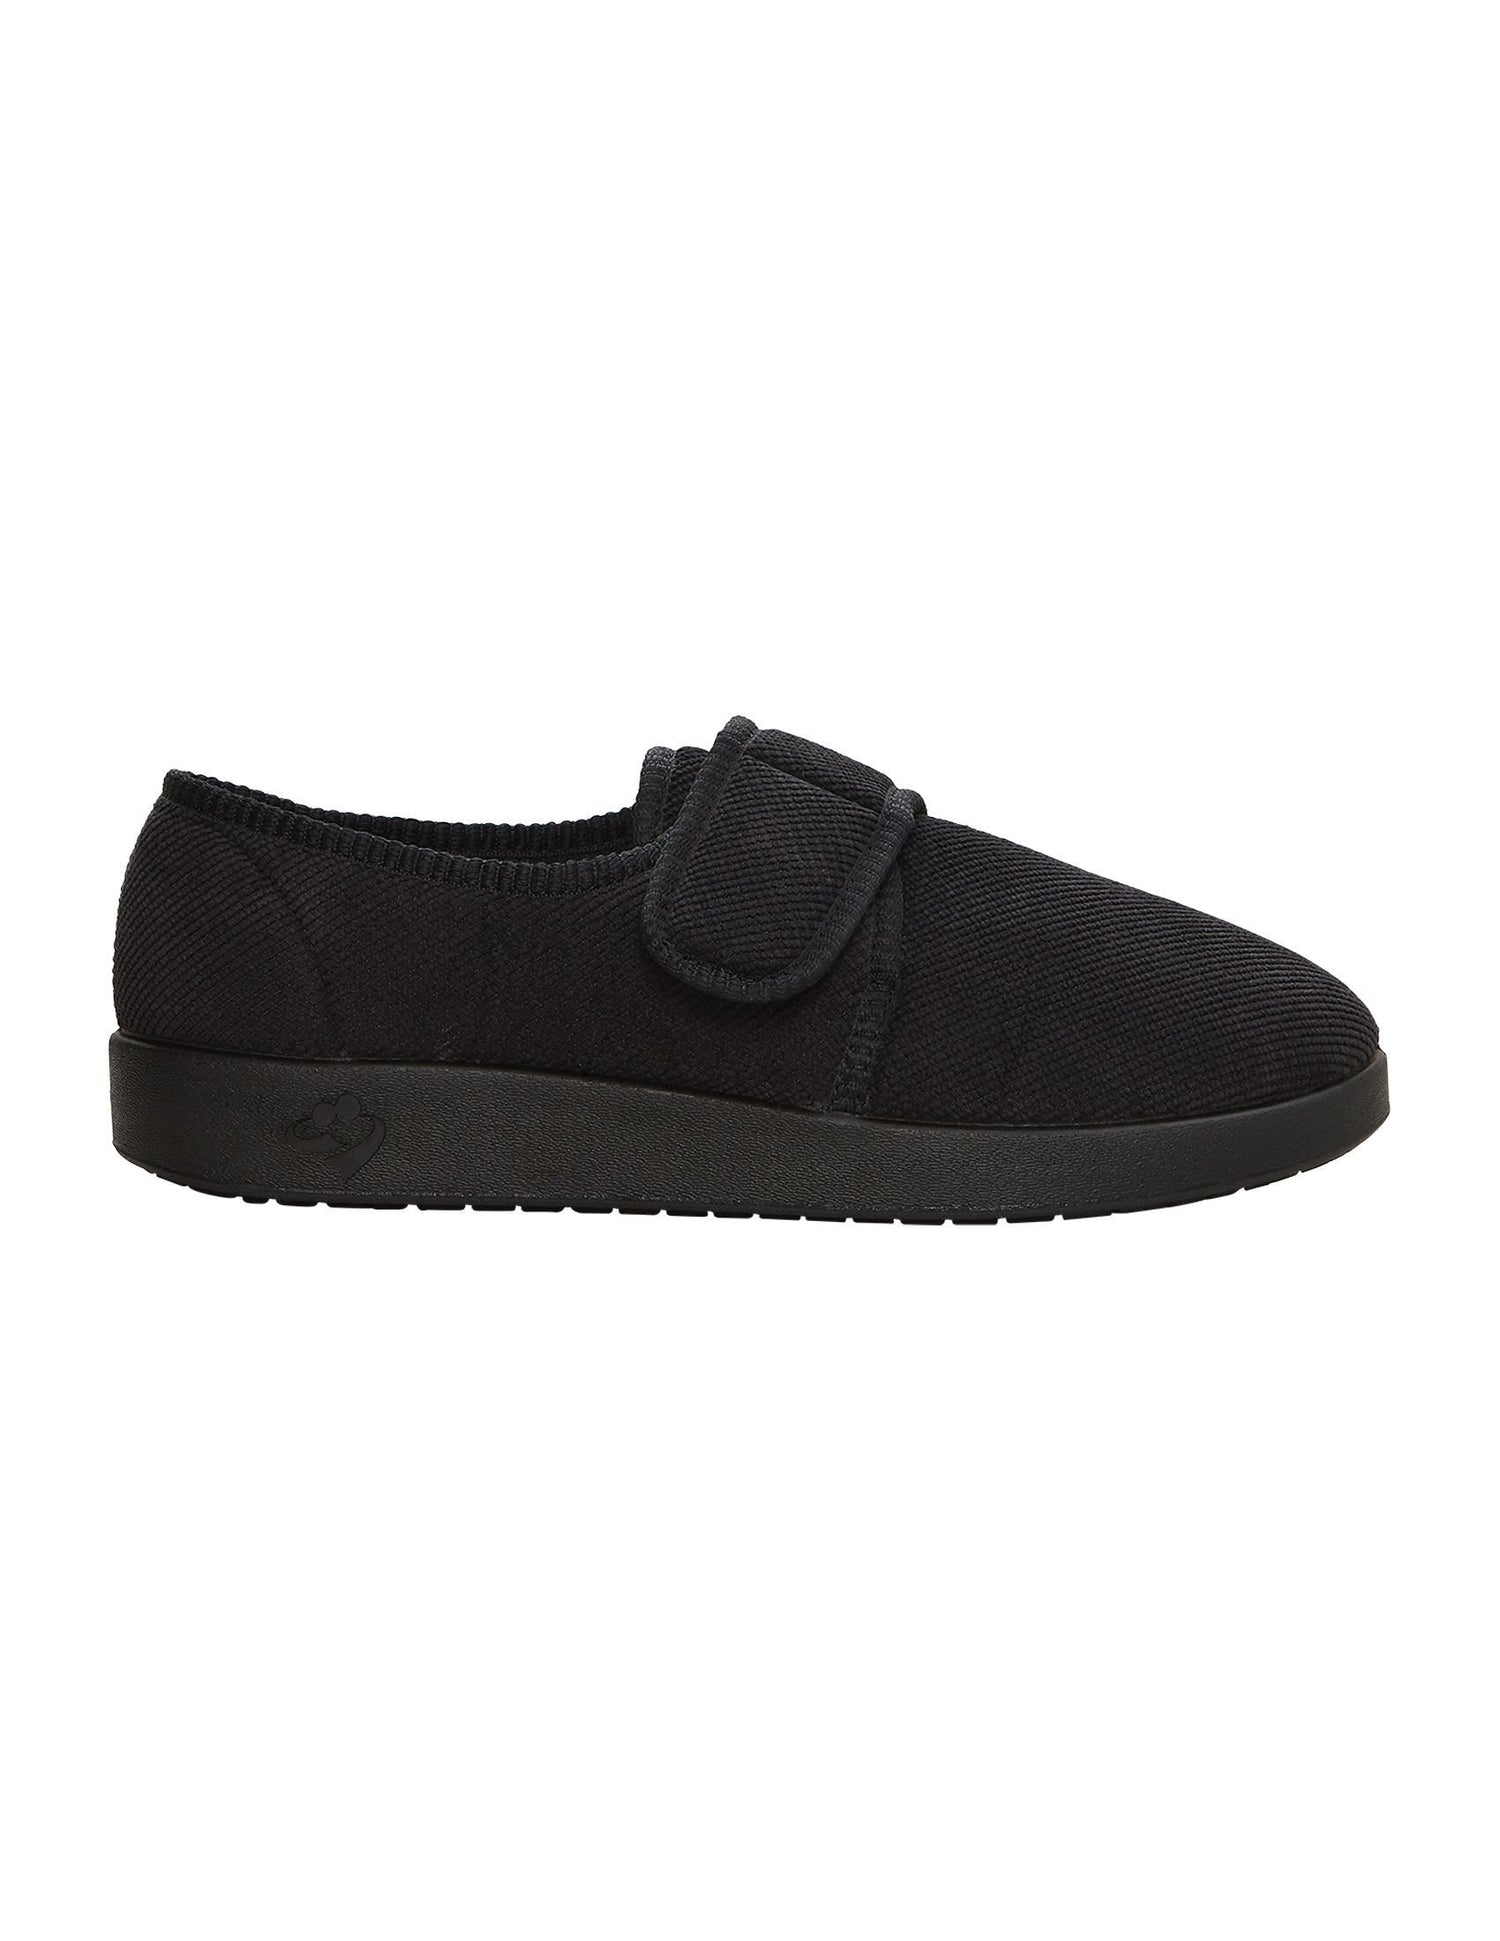 Side of wide black non-slip indoor slippers with large Velcro closure at top adjusting fit